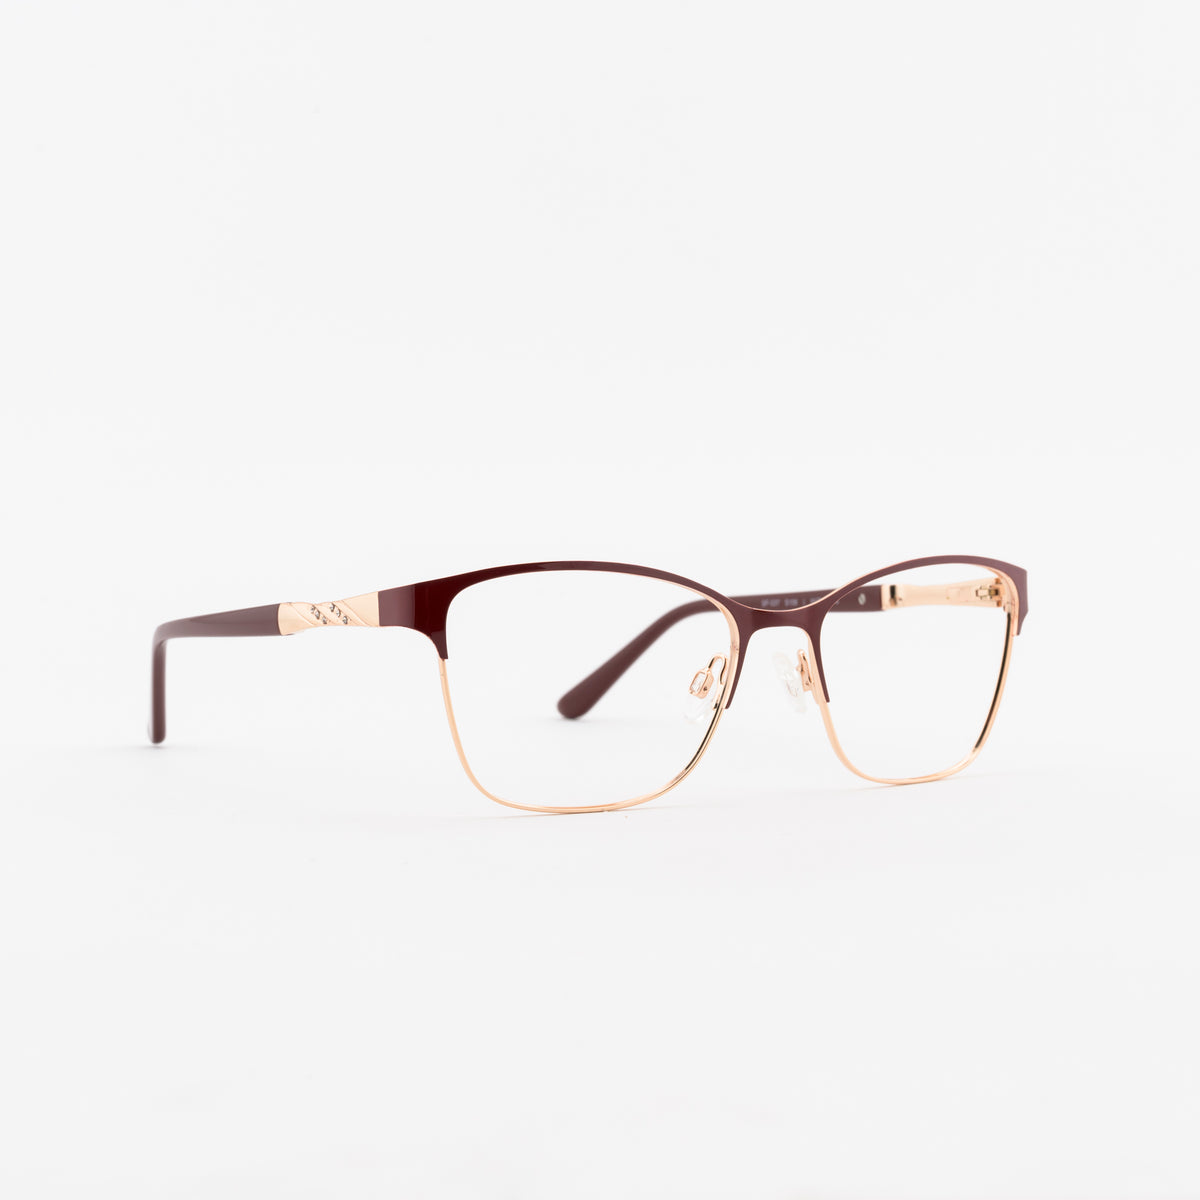 SF-537 Frames Superflex 55 S106 - BURGUNDY ROSE GOLD Not Available